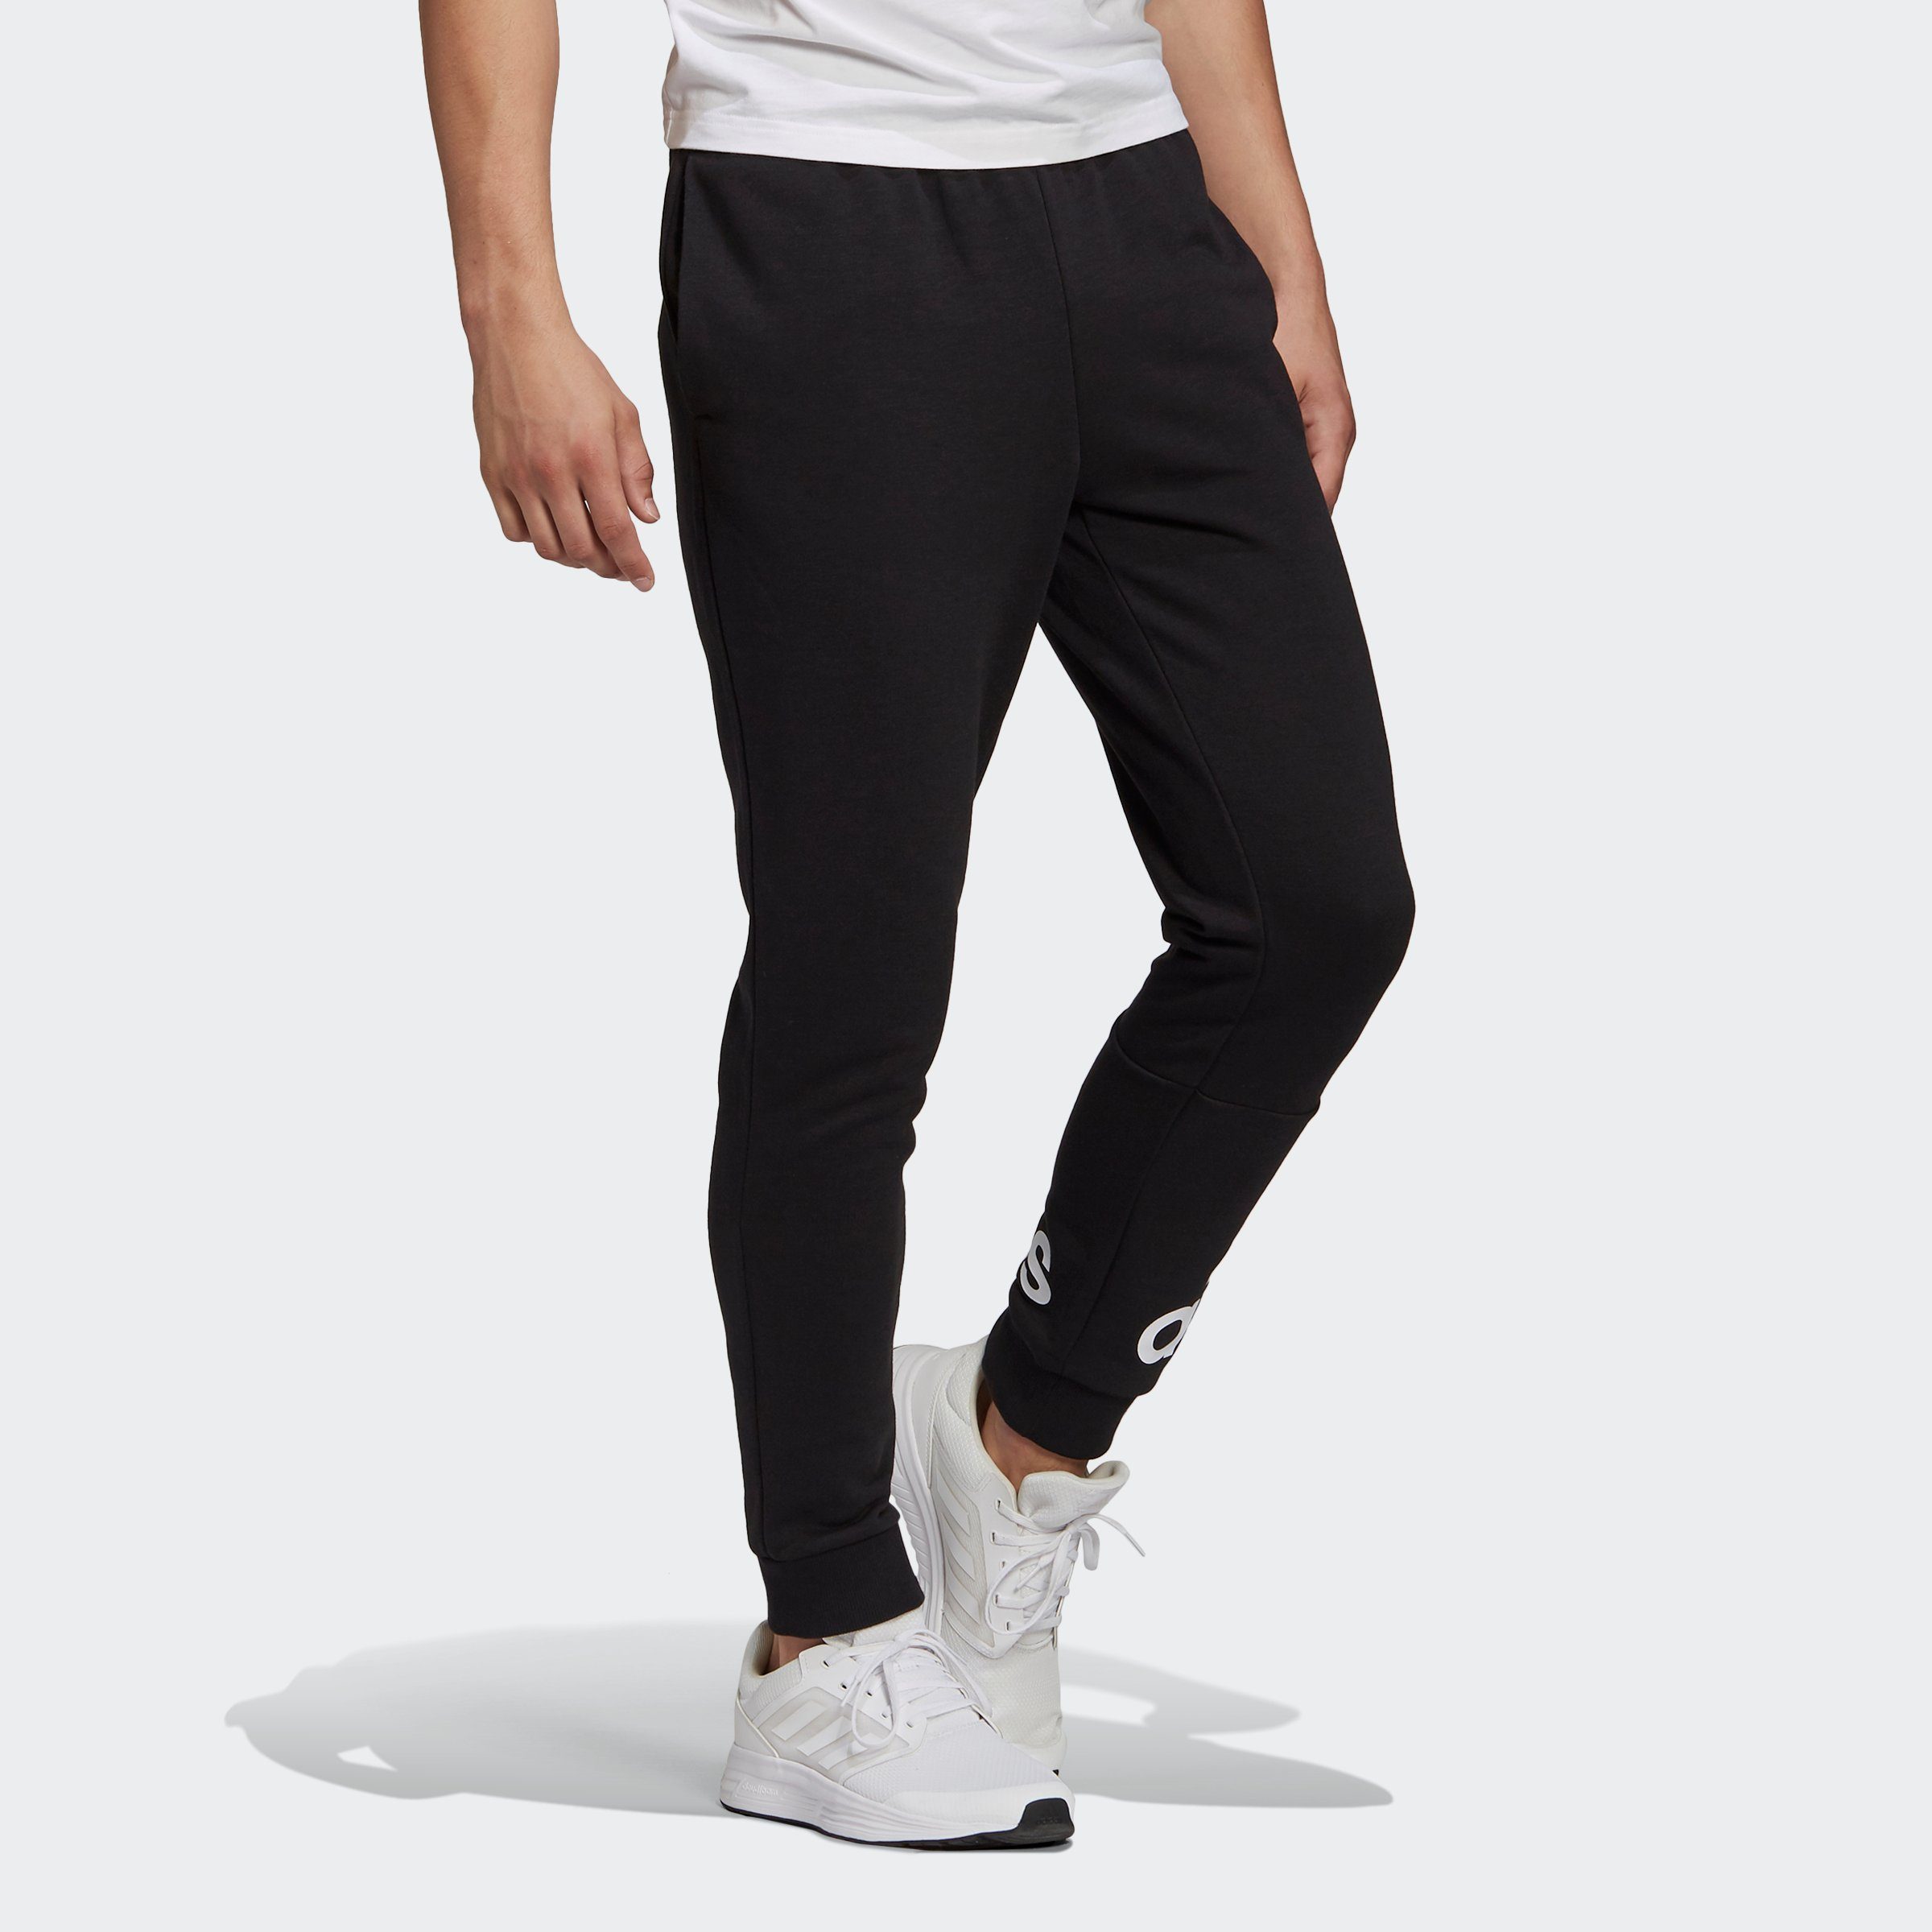 FRENCH % 1-tlg), Sporthose Terry) 53 (French ESSENTIALS HOSE ( 36 Baumwolle % / 11 CUFF Viskose adidas recycelter Sportswear % TERRY TAPERED LOGO Polyester /